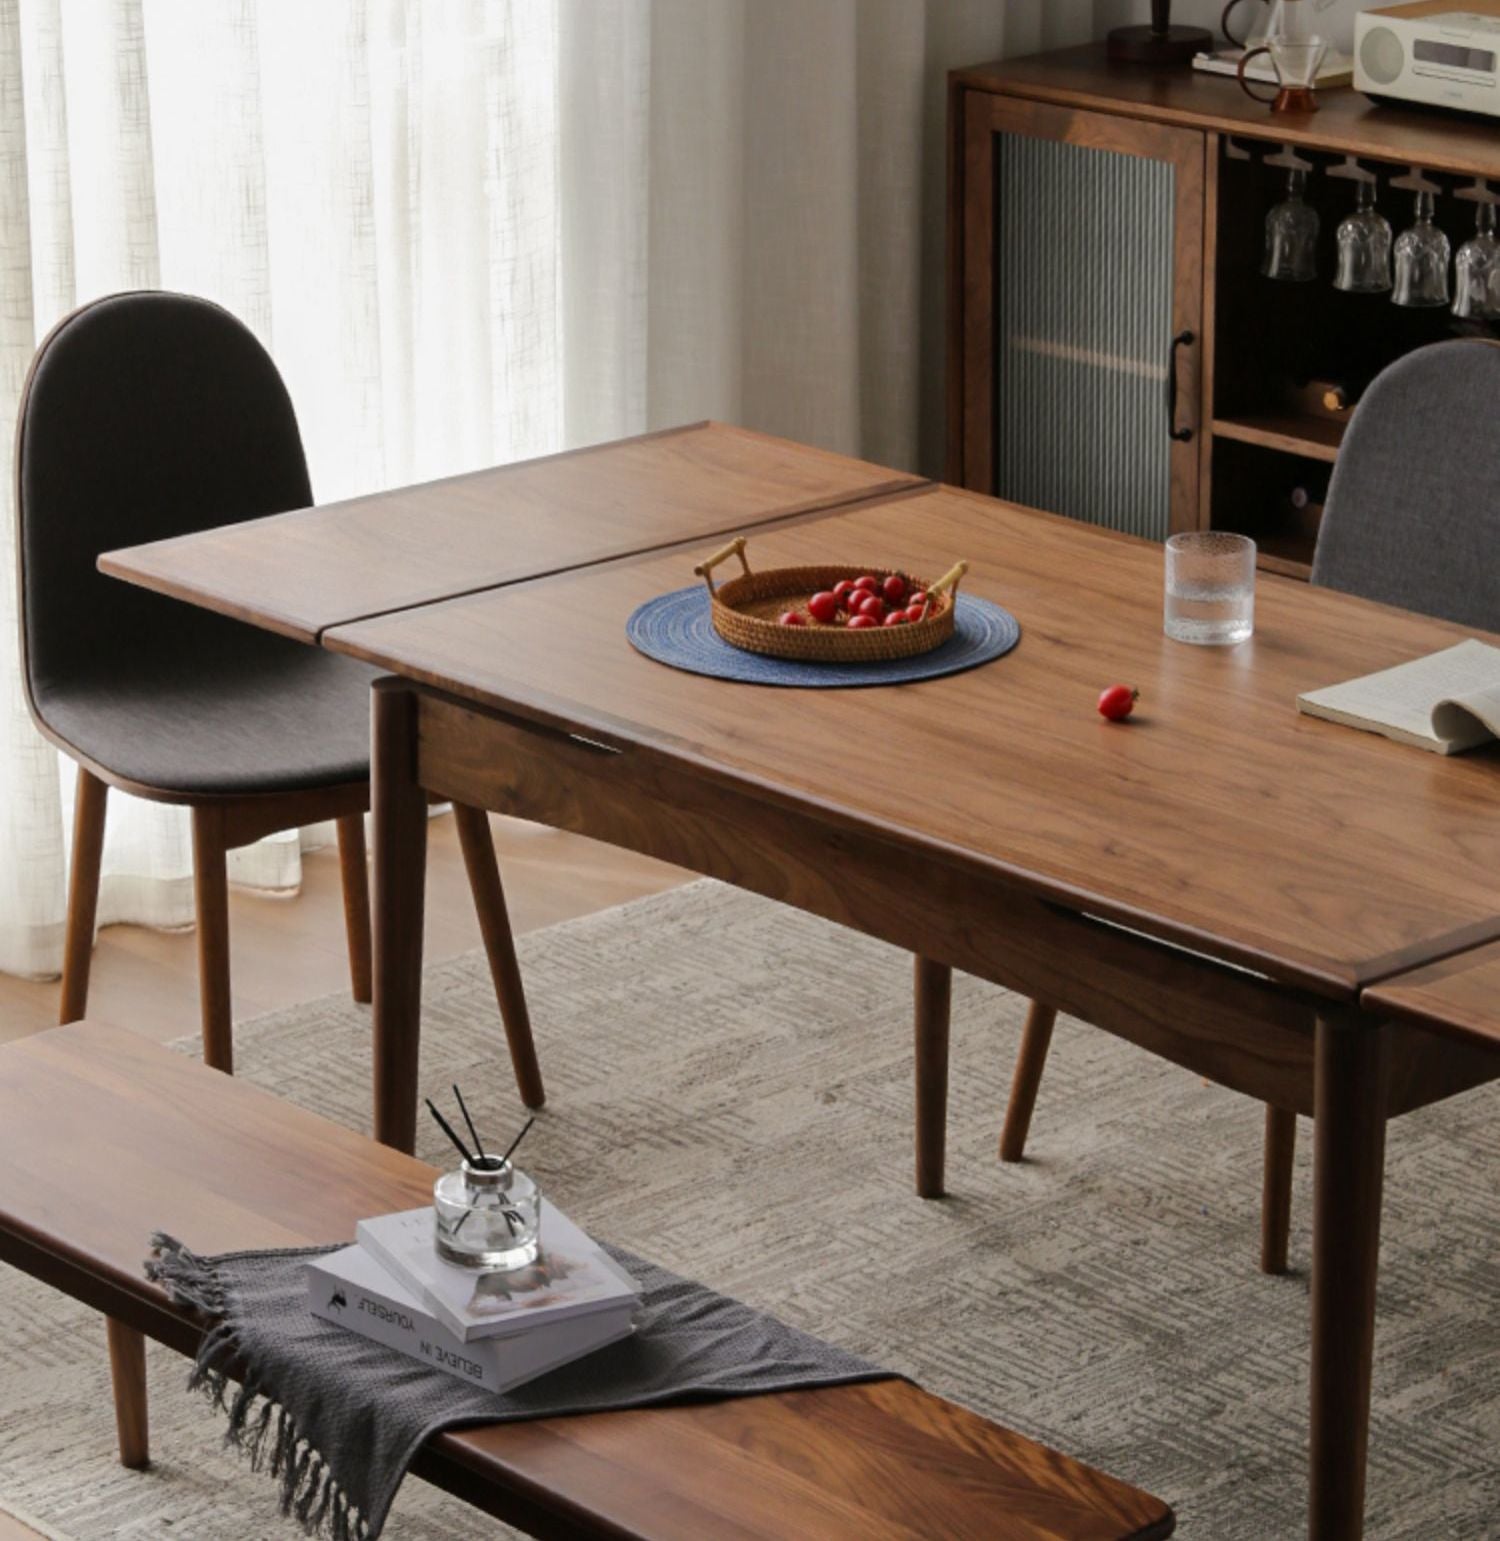 Extendable Dining Table in black walnut wood, made in solid american walnut wood